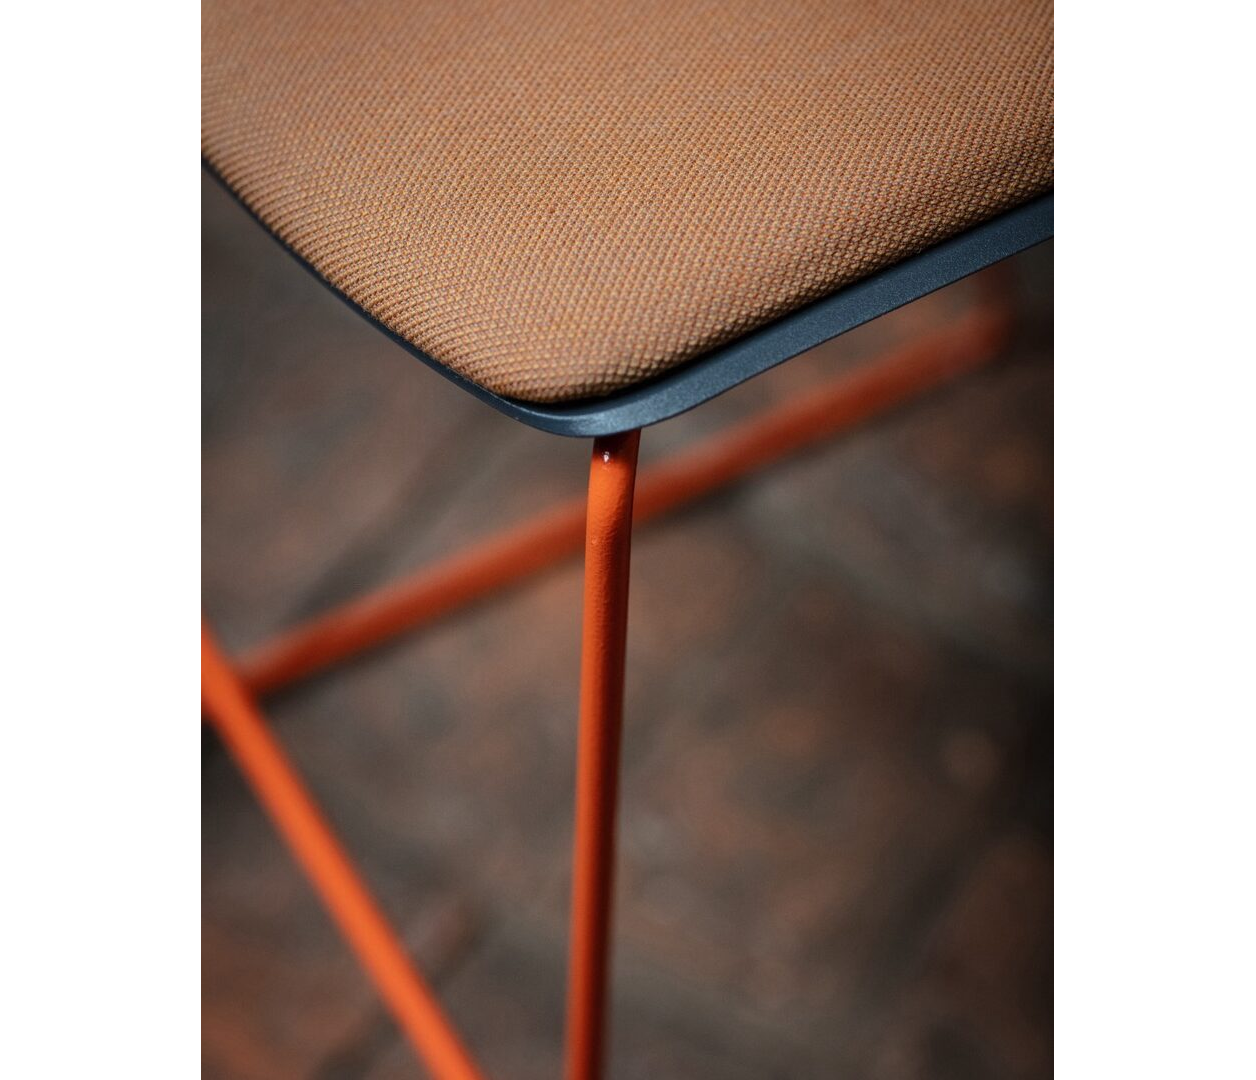 OCEE&FOUR – Chairs – FourSure 105 – Details Image 3 Large Large